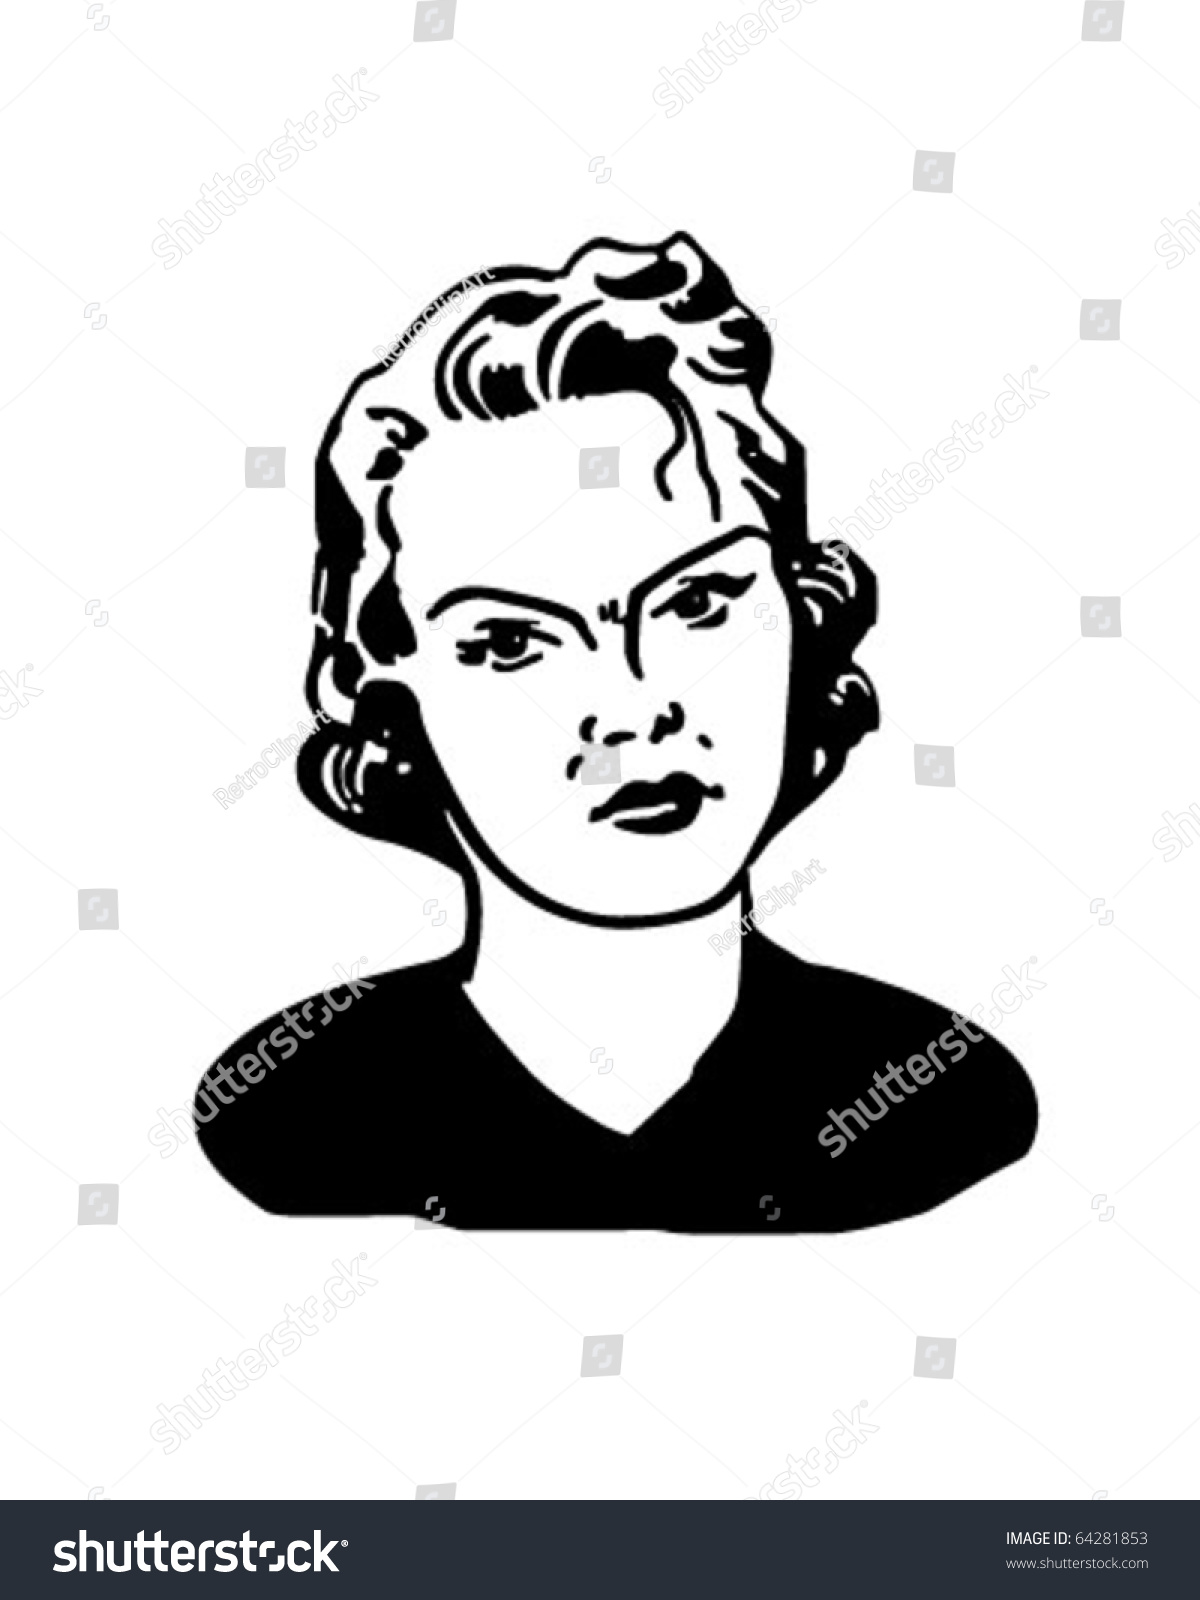 SVG of Angry Woman - Retro Clipart Illustration svg